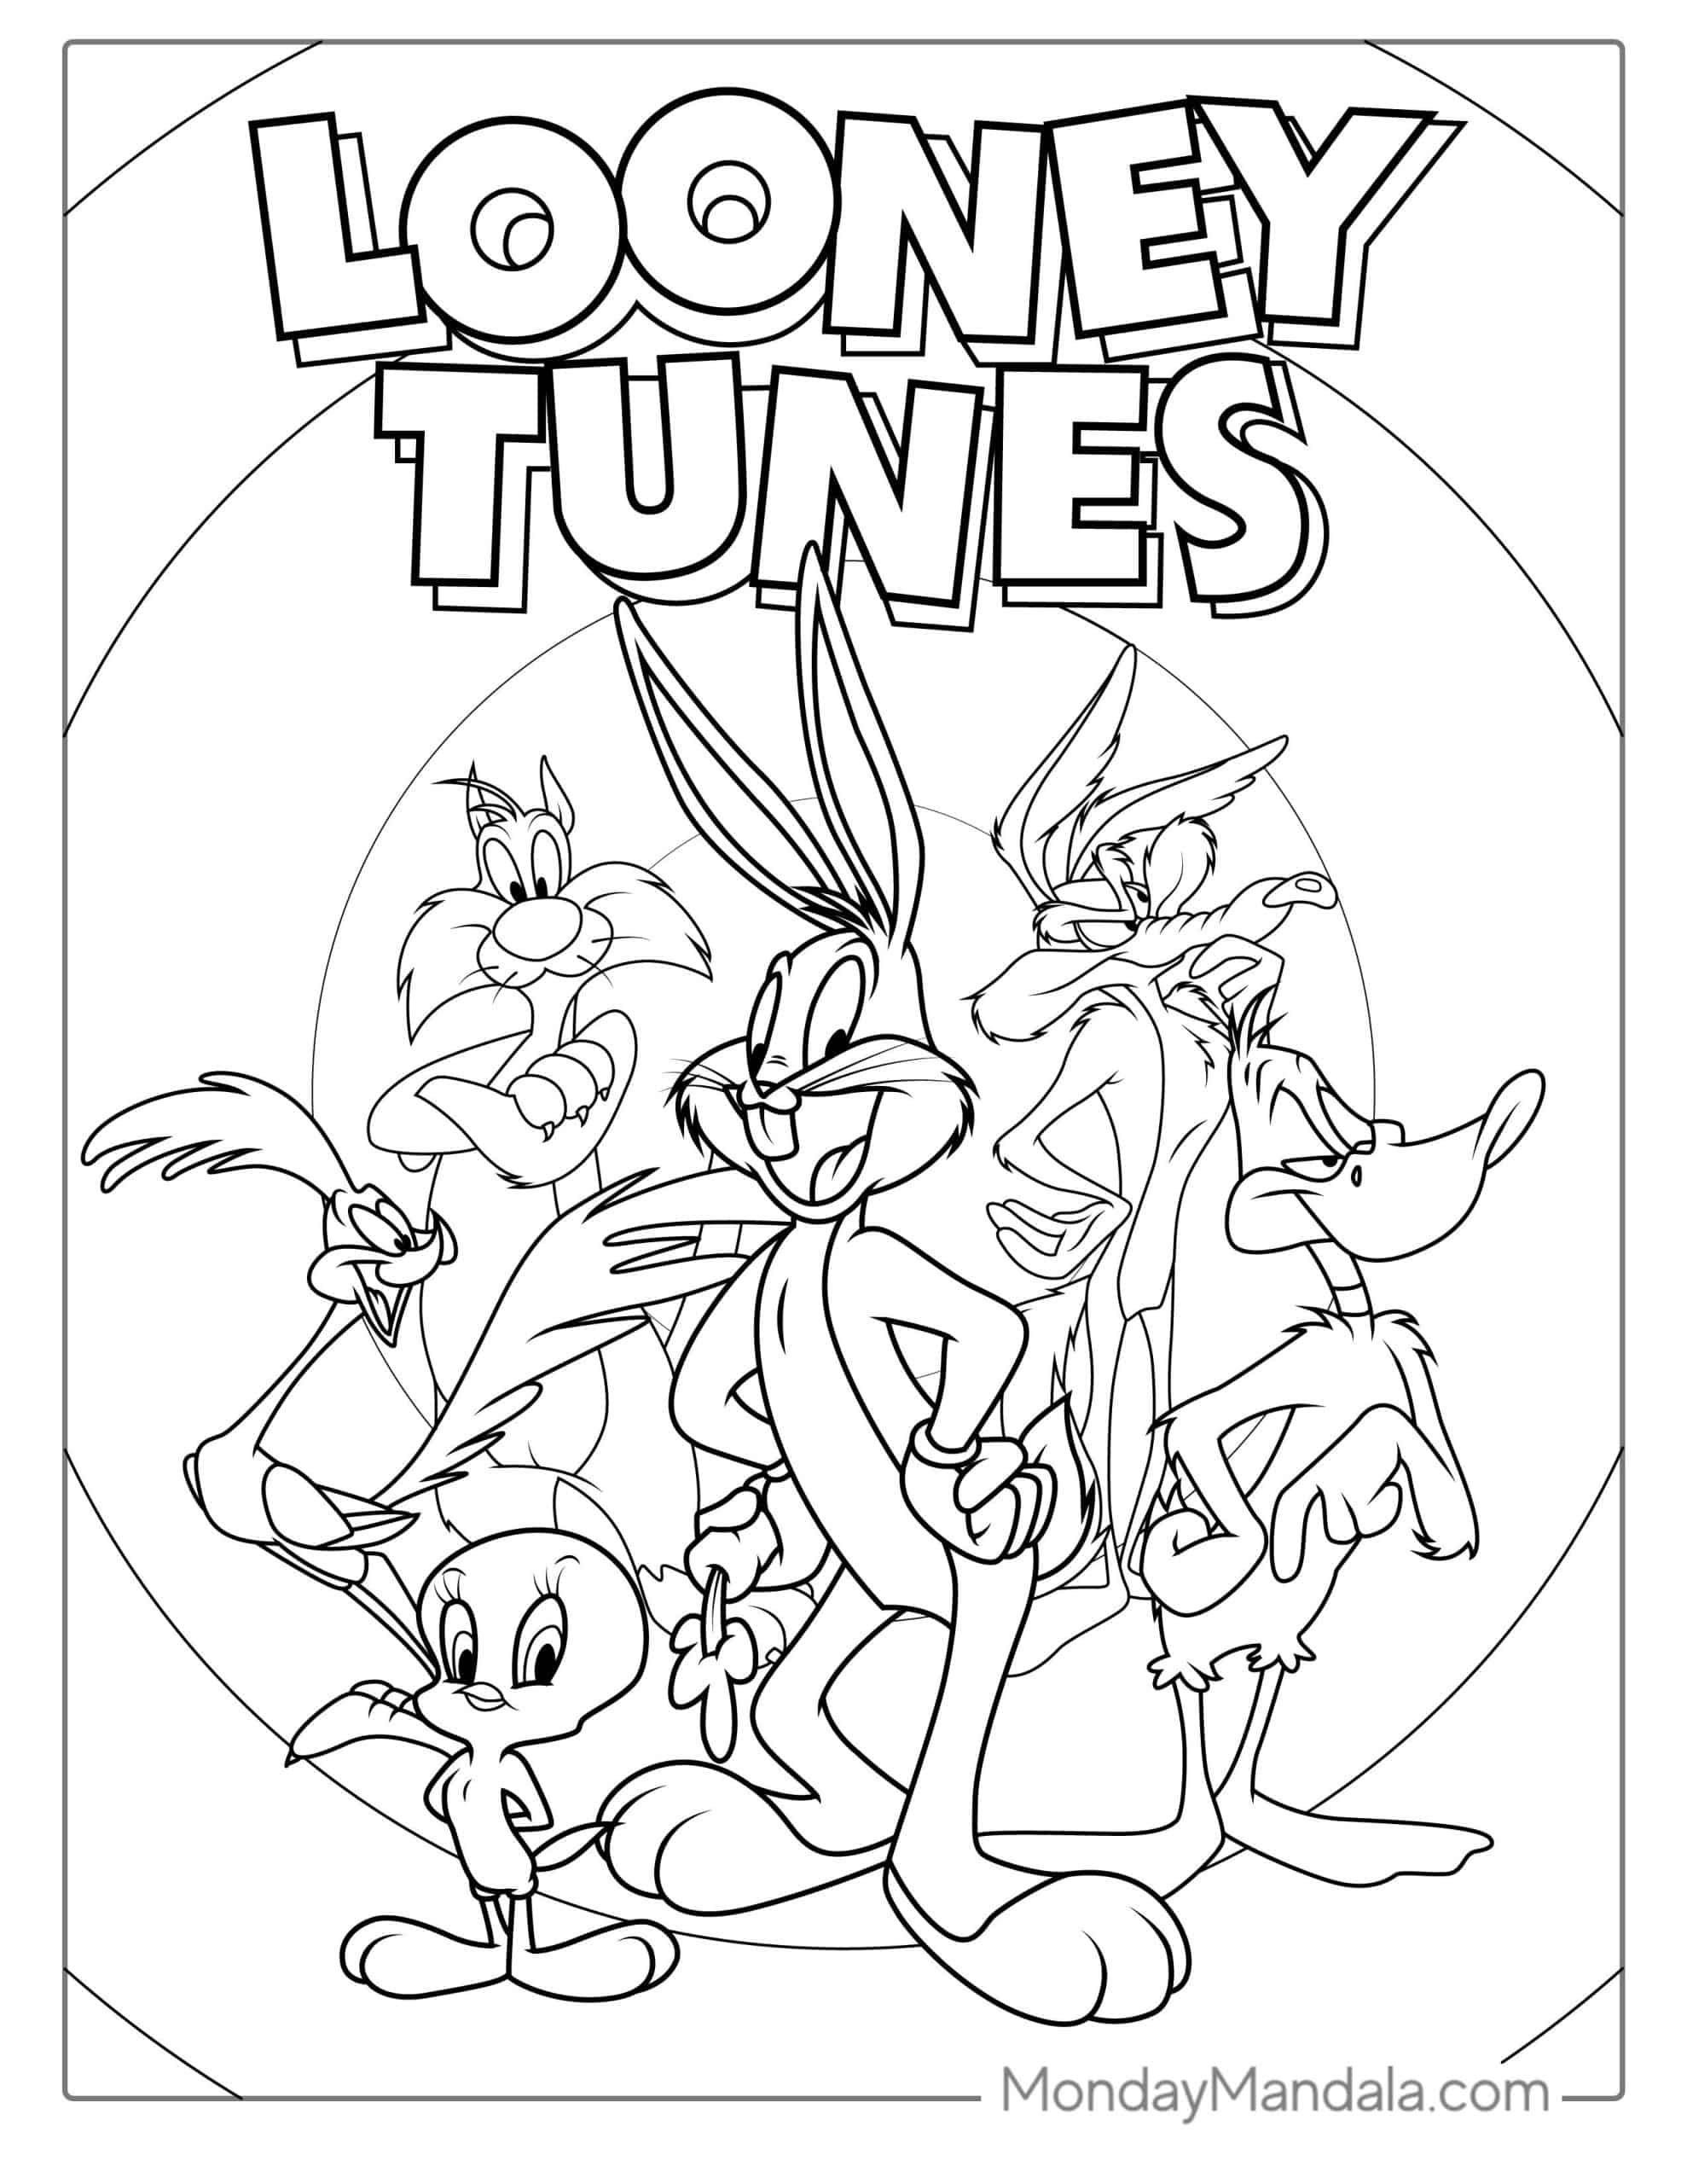 Looney tunes coloring pages free pdf printables disney coloring pages printables free disney coloring pages cartoon coloring pages